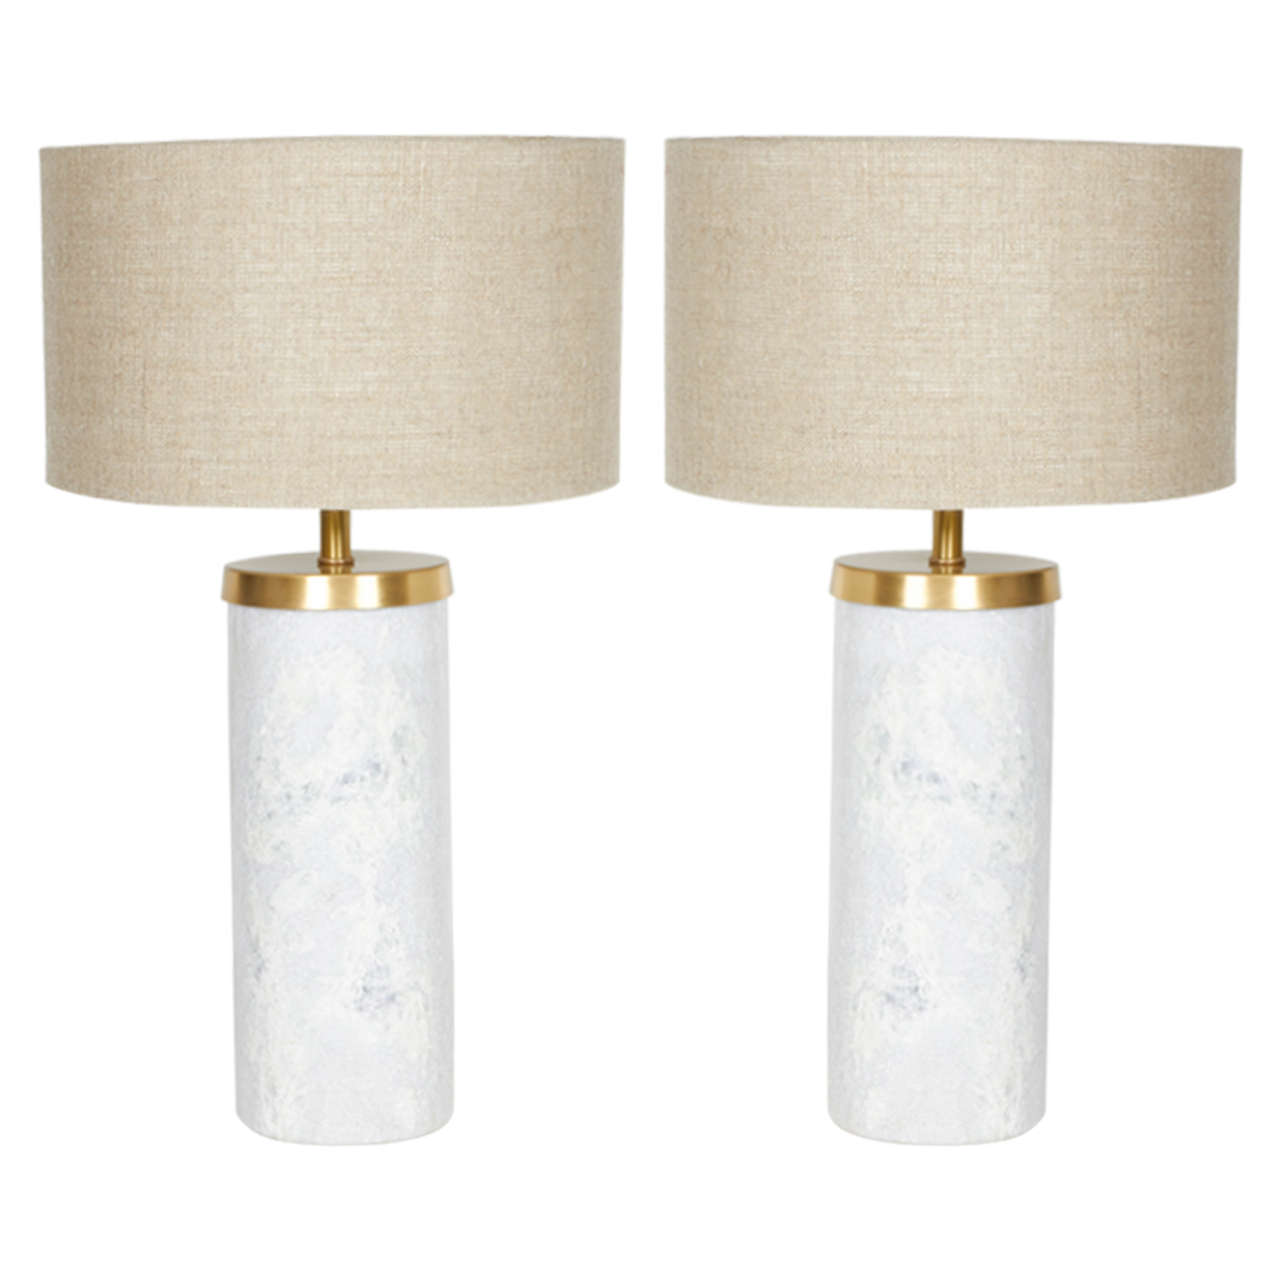 Pair of Solid Marble Cylinder Desk Lamps with Brass Fittings